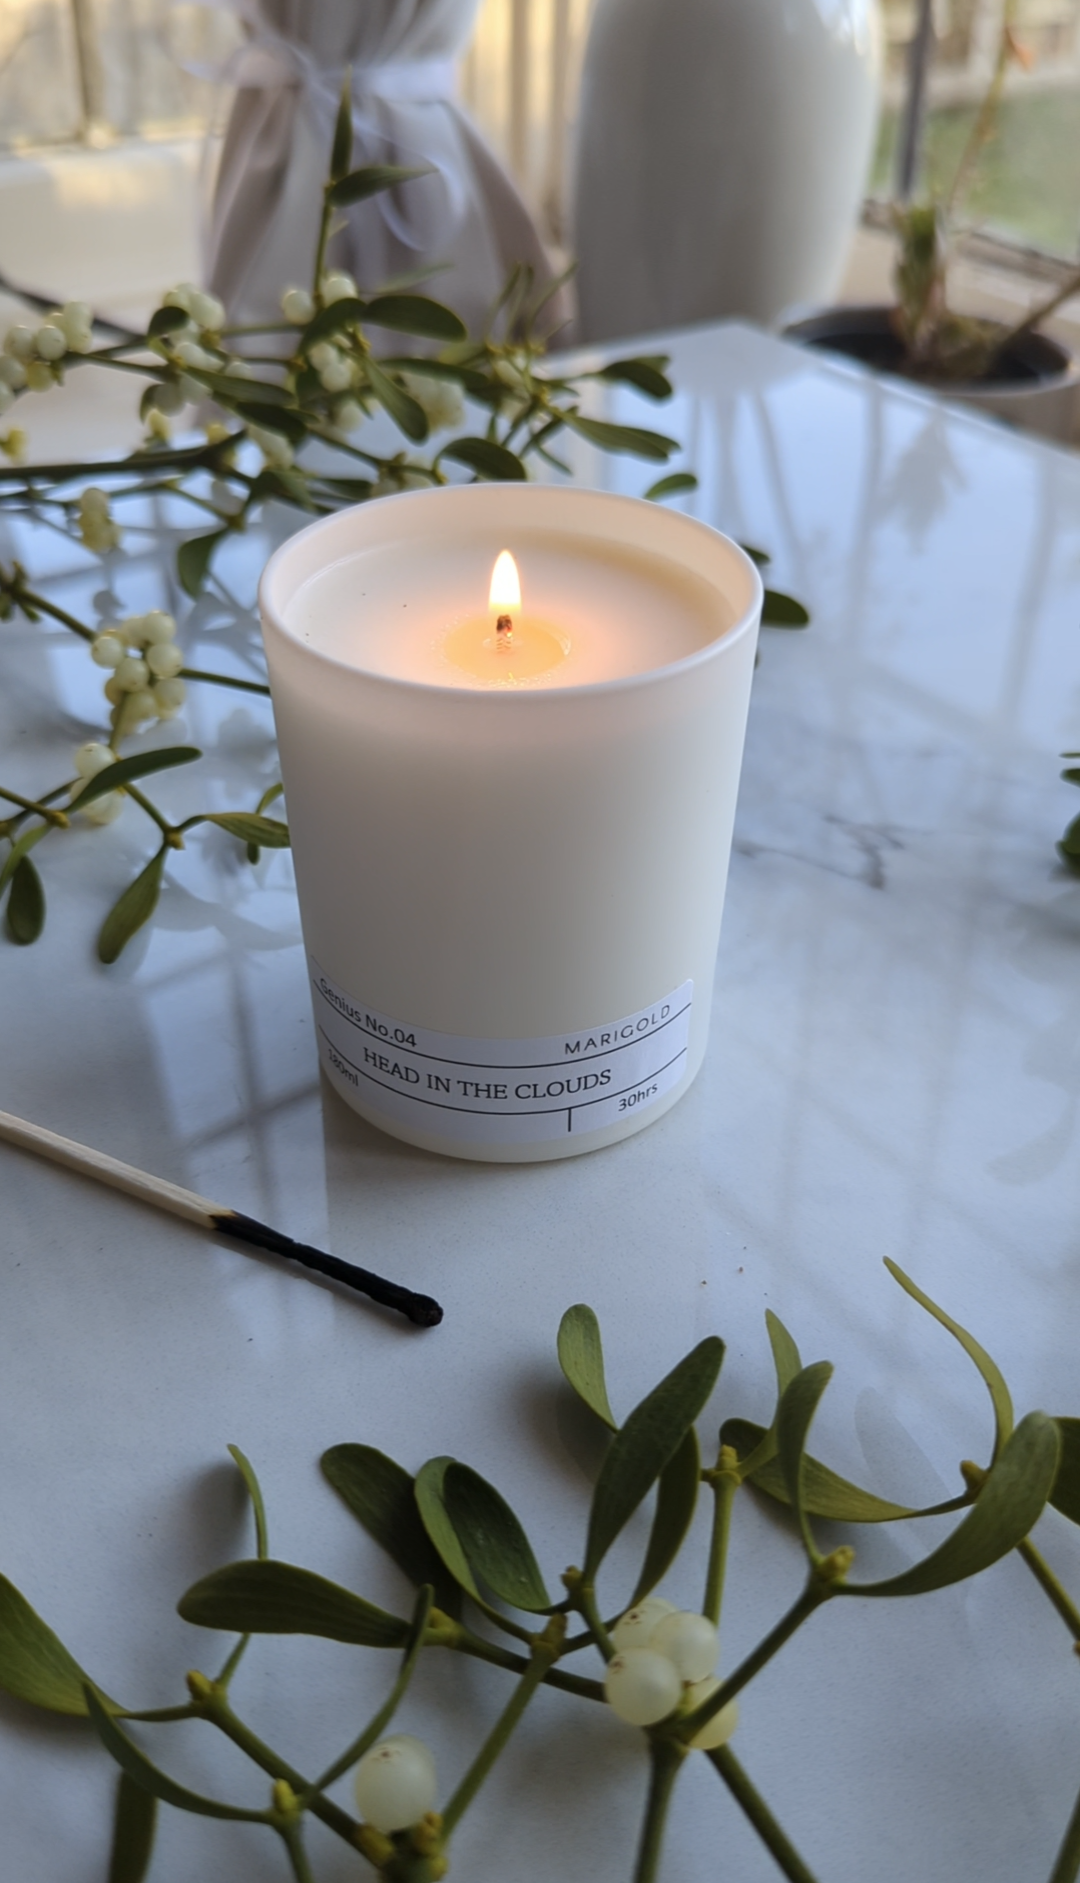 Head In The Clouds Wellbeing Aromatherapy Candle